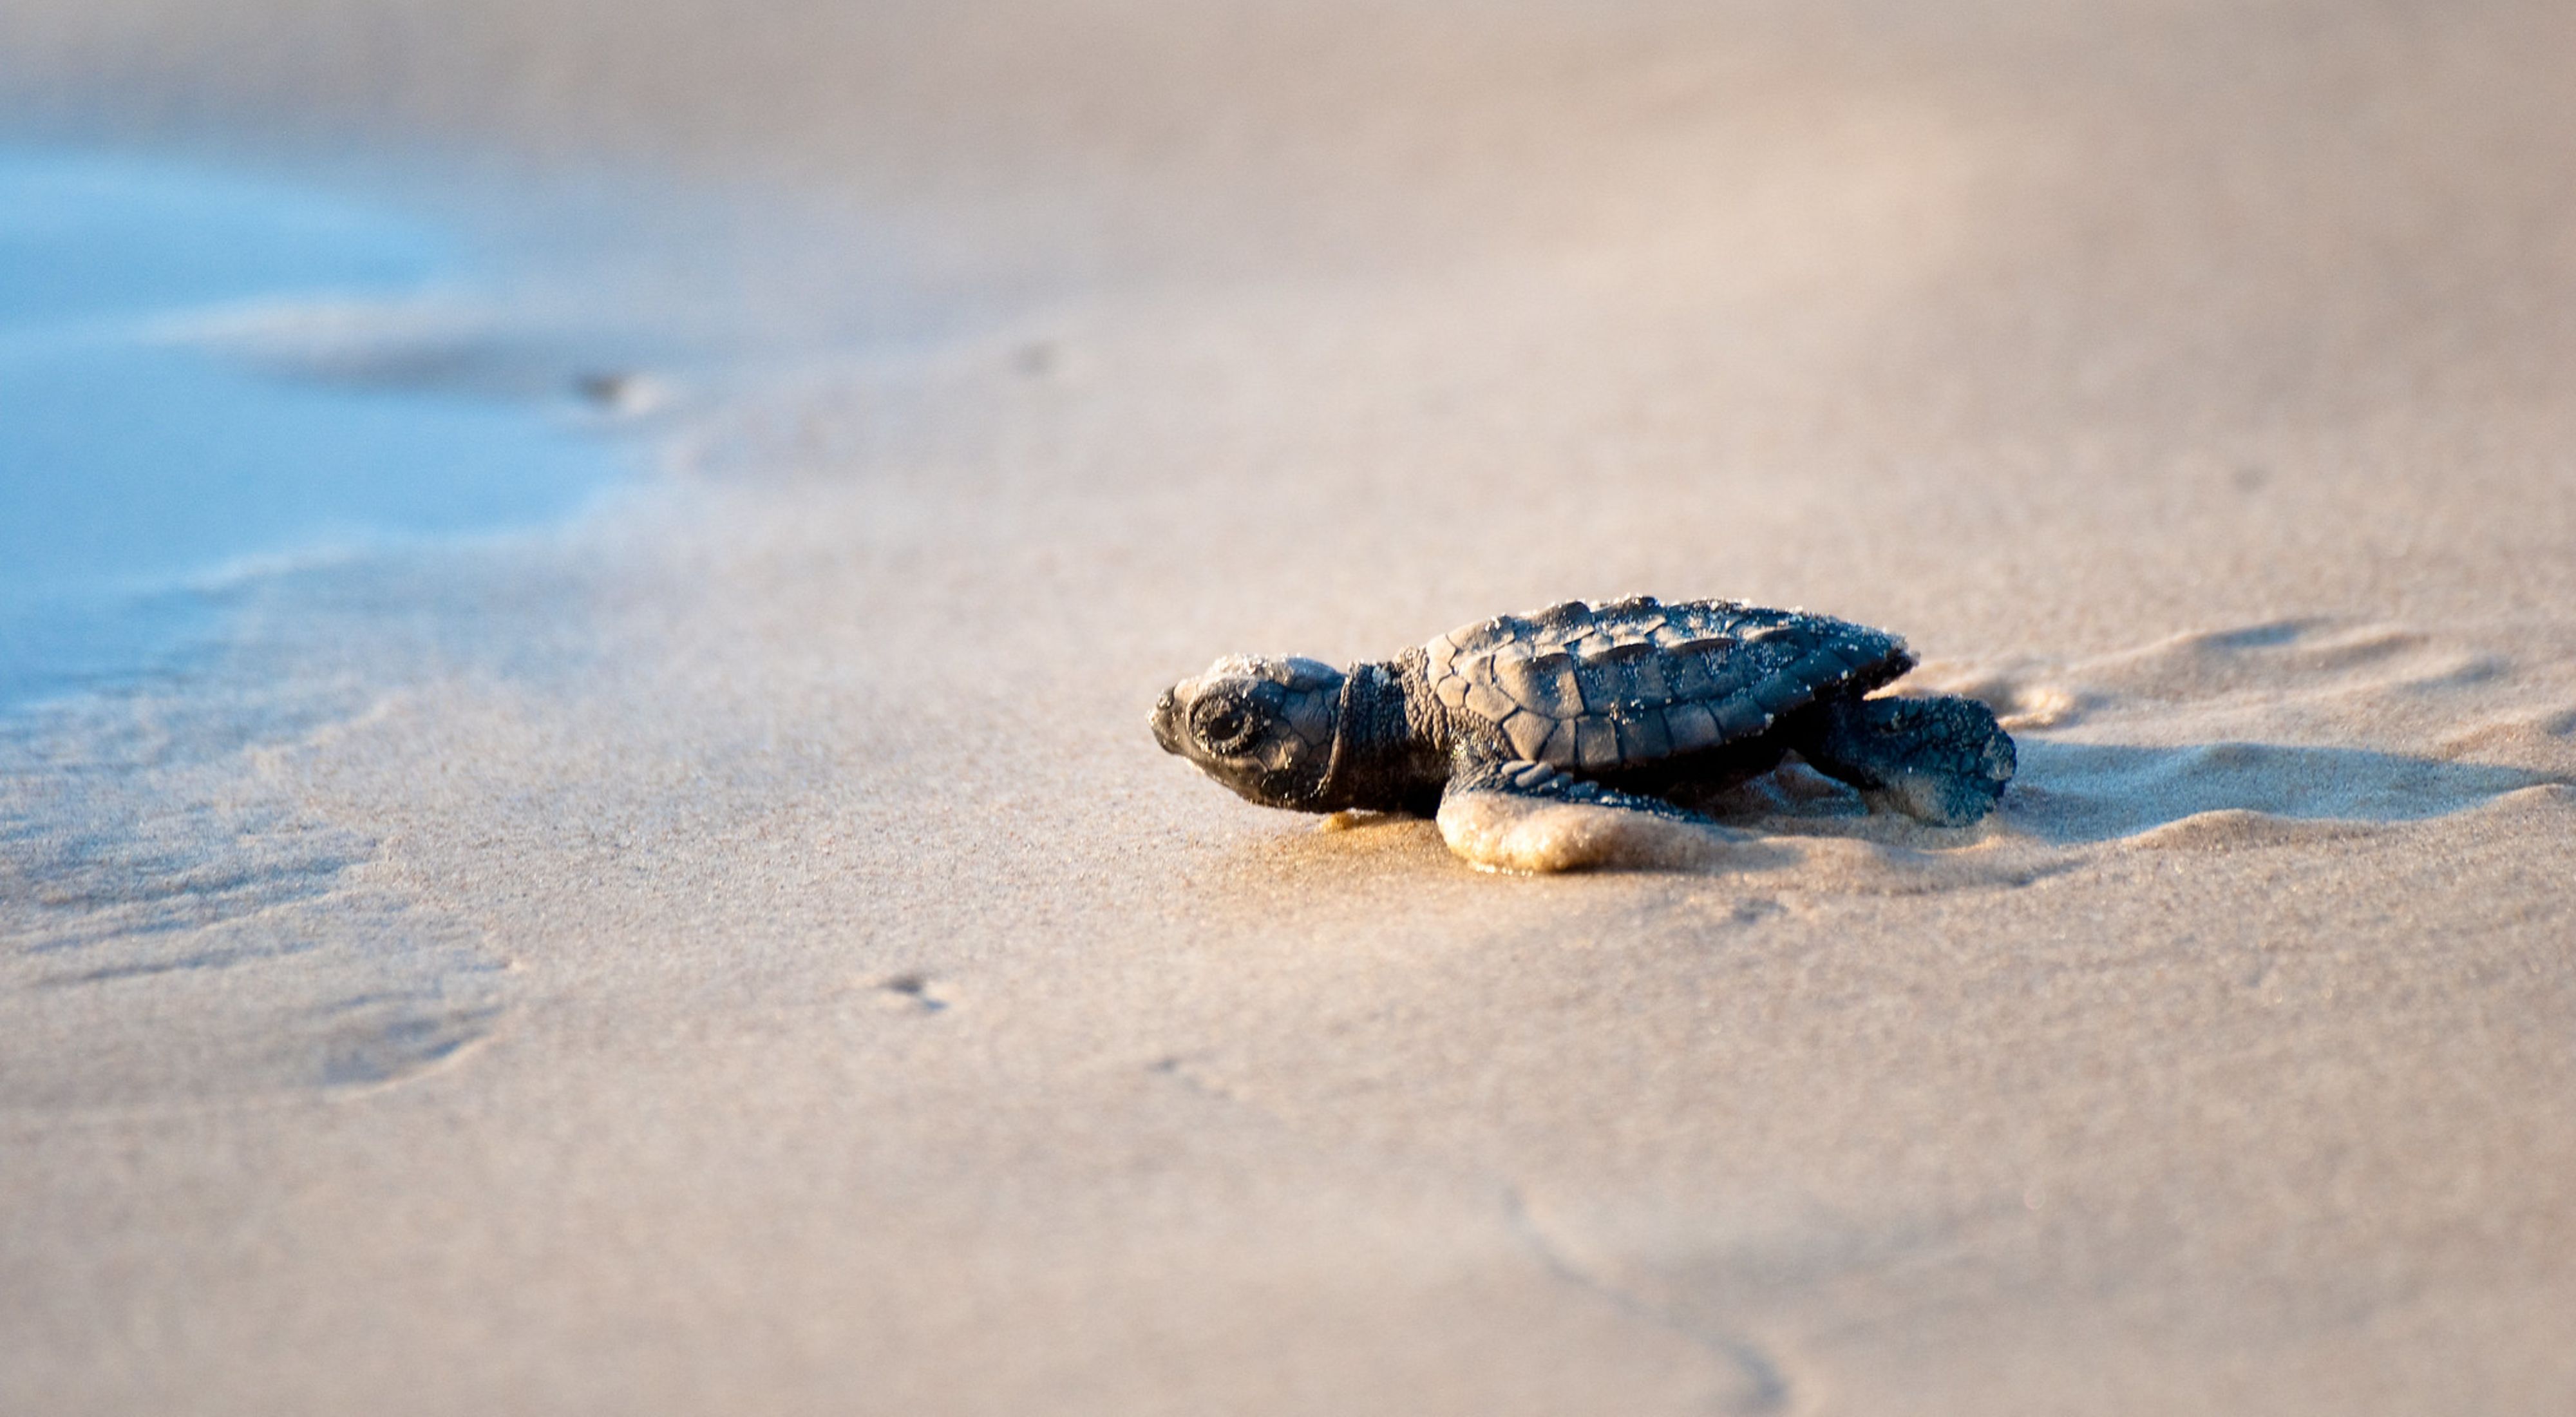 A small brown turtle crawls along wet sand.